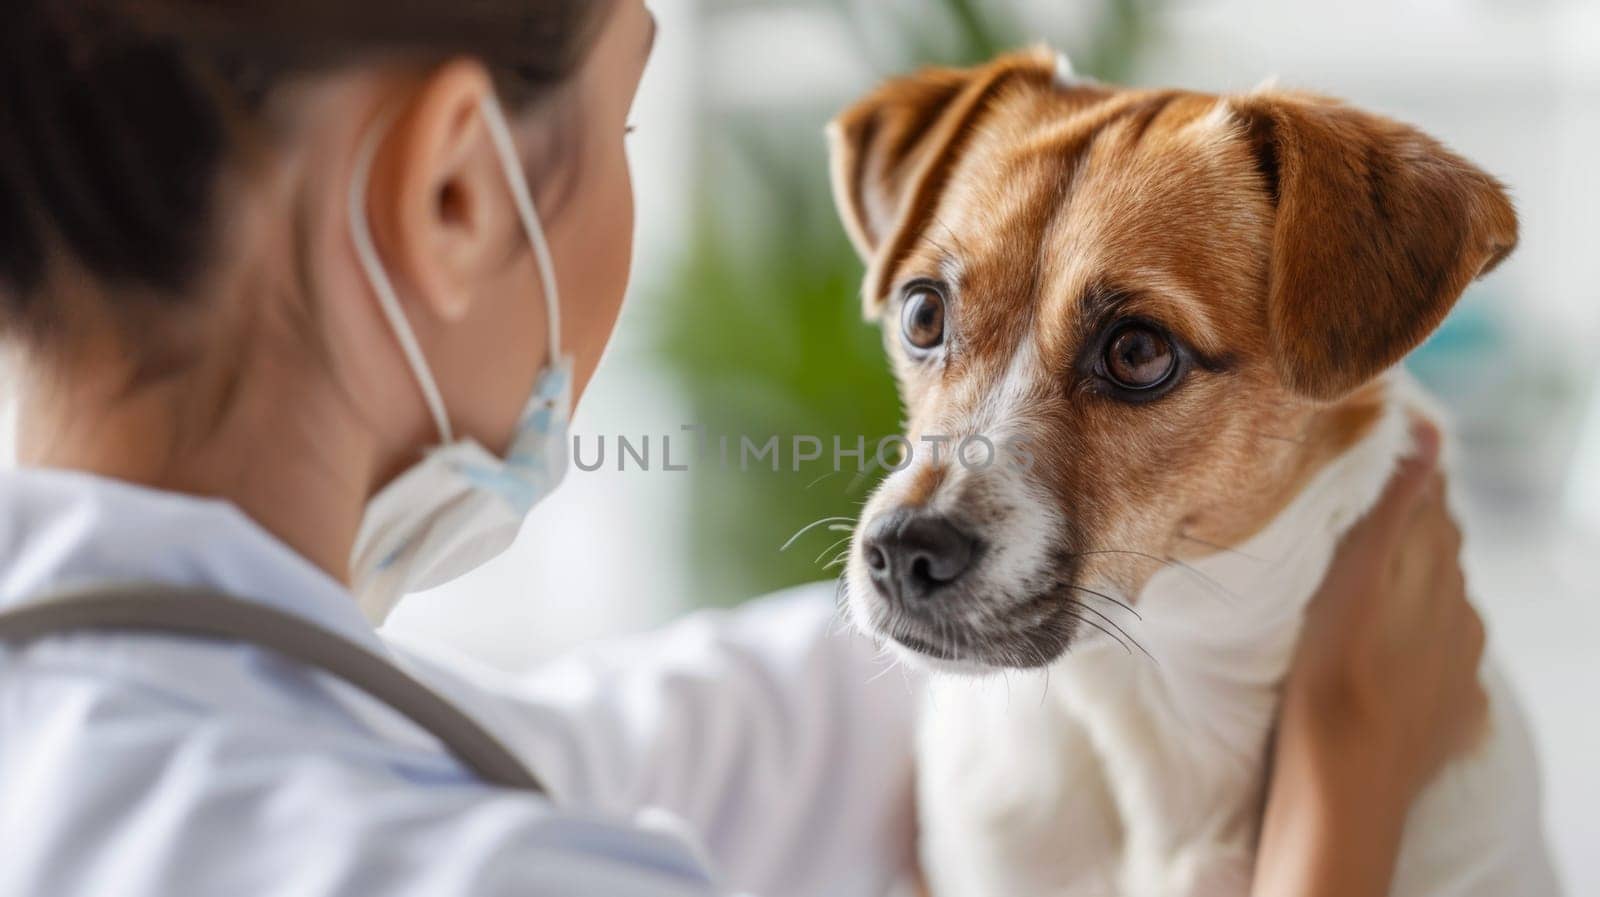 A woman holding a dog while wearing a stethoscope